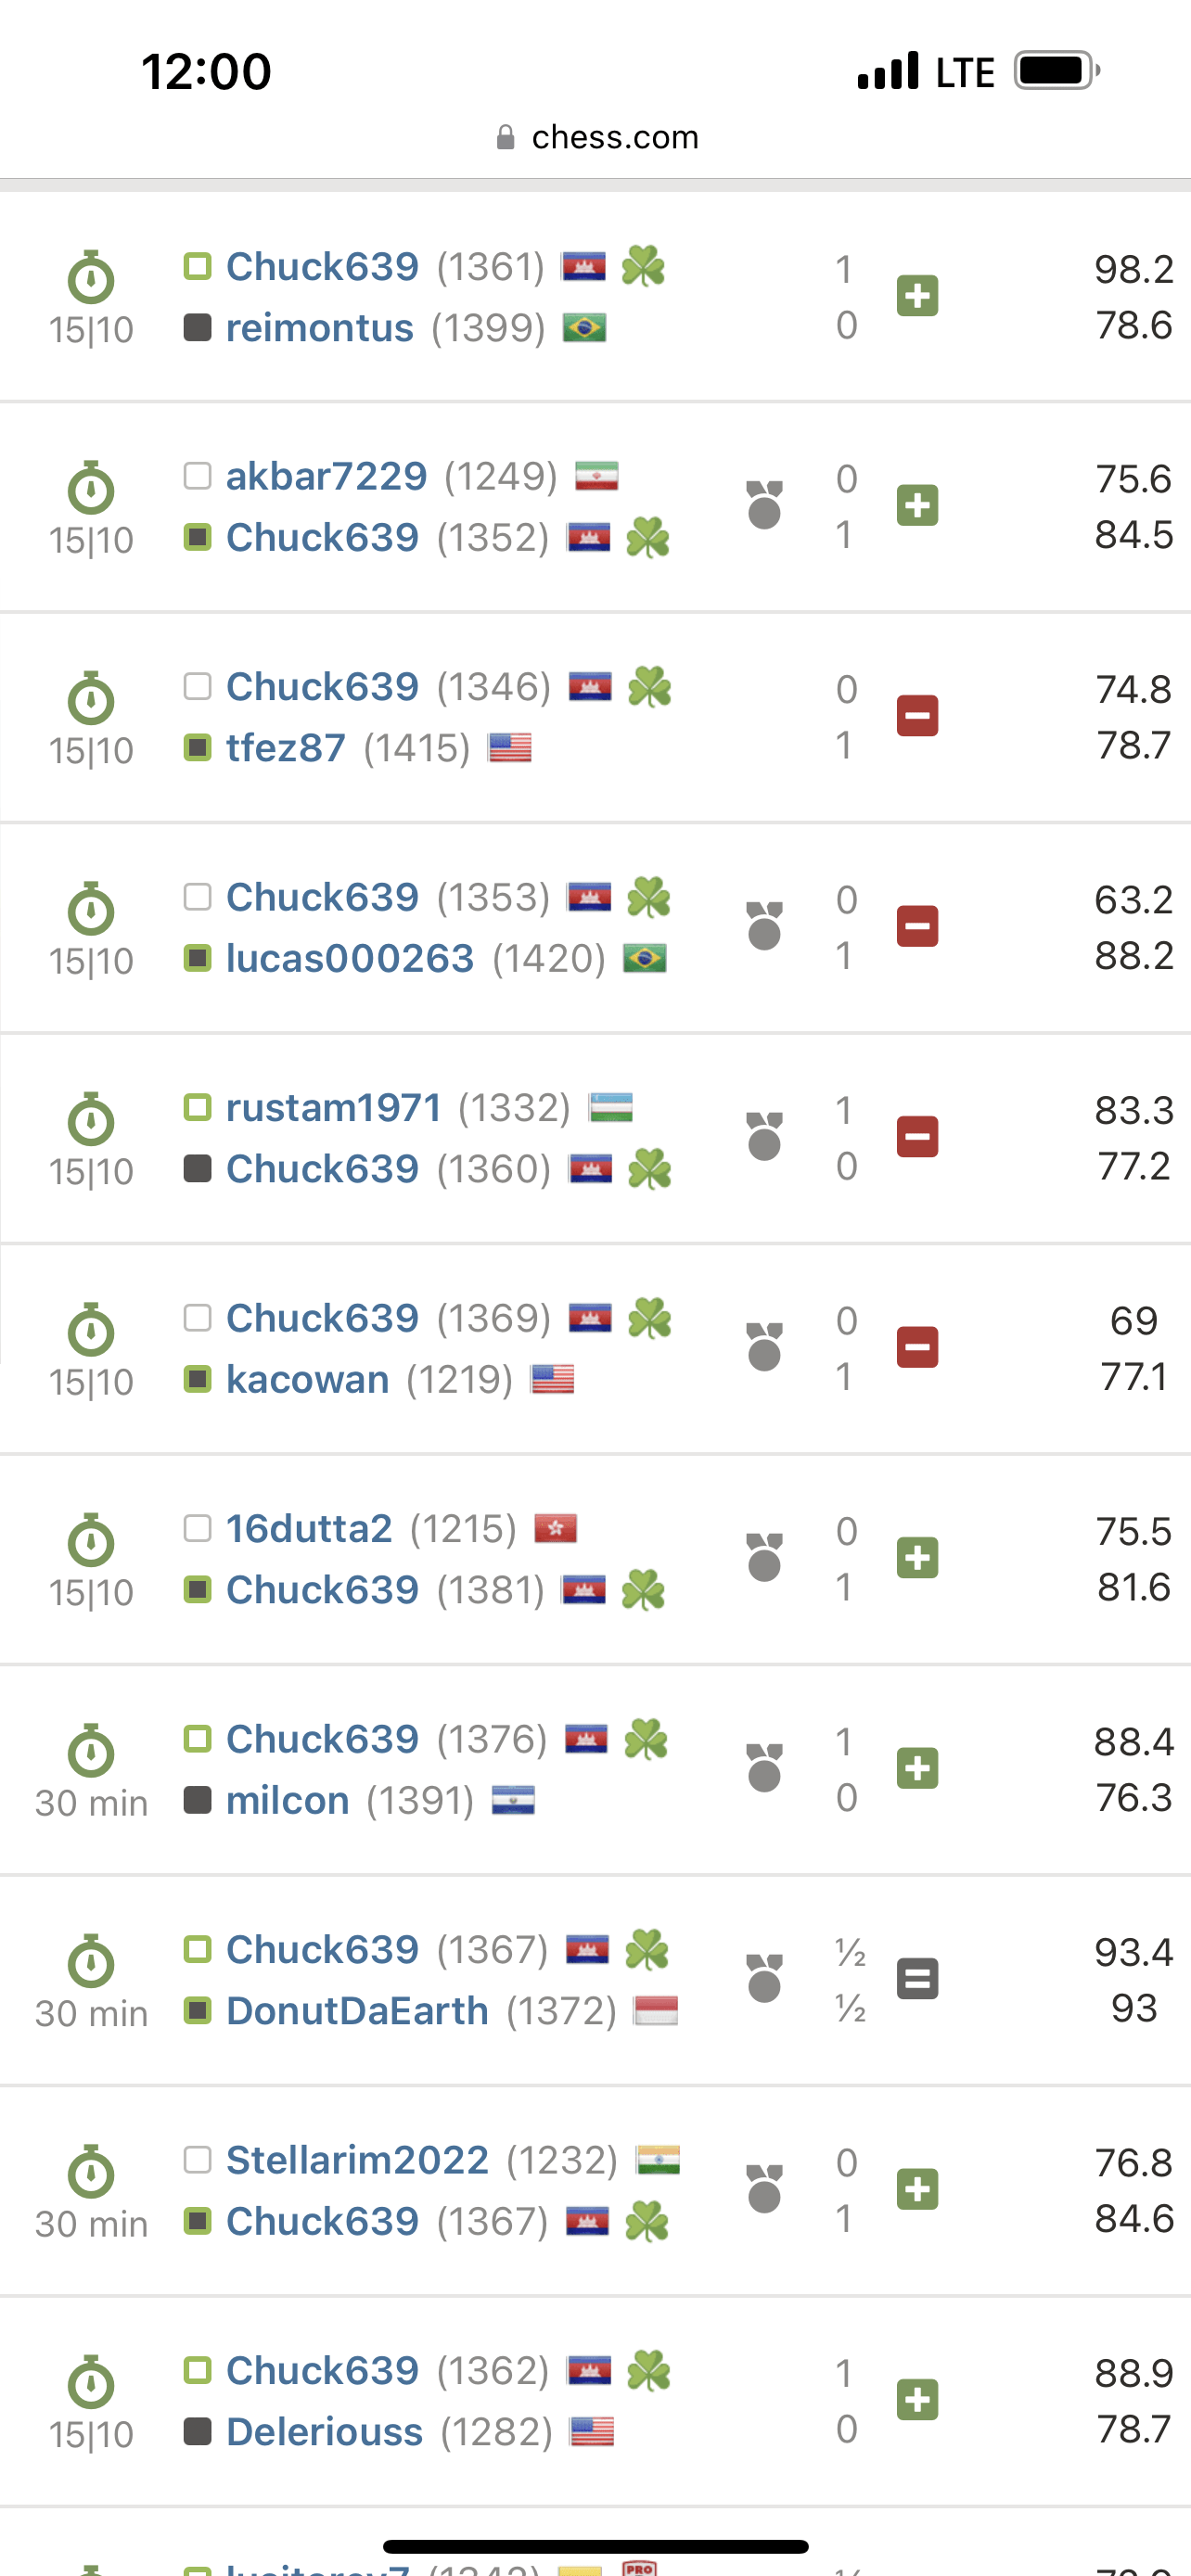 How Do You Improve Your Chess Rating by 200 Points?